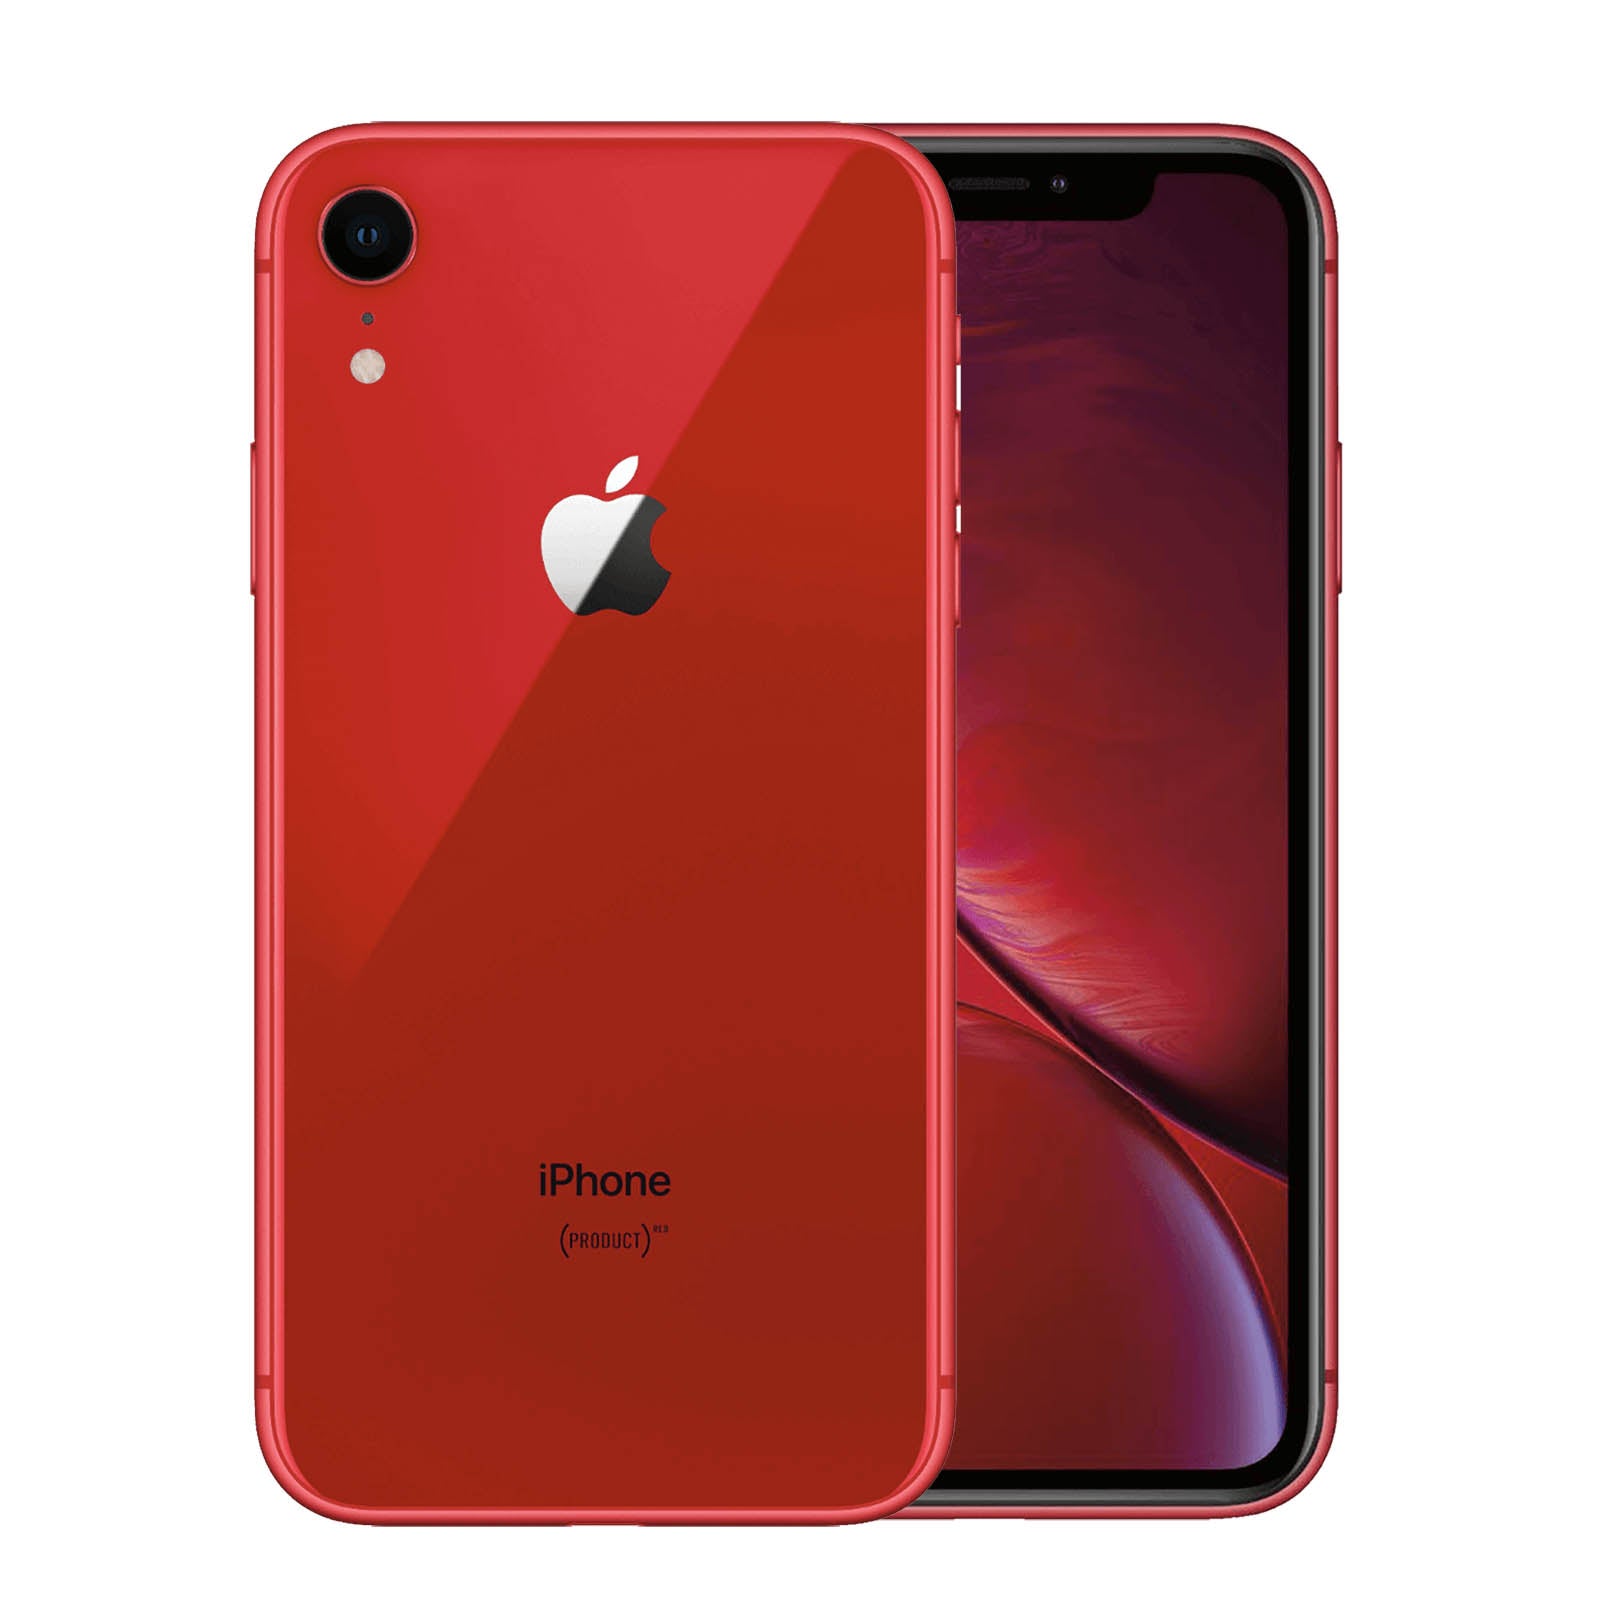 Apple iPhone XR 256GB Product Red Very Good - Unlocked